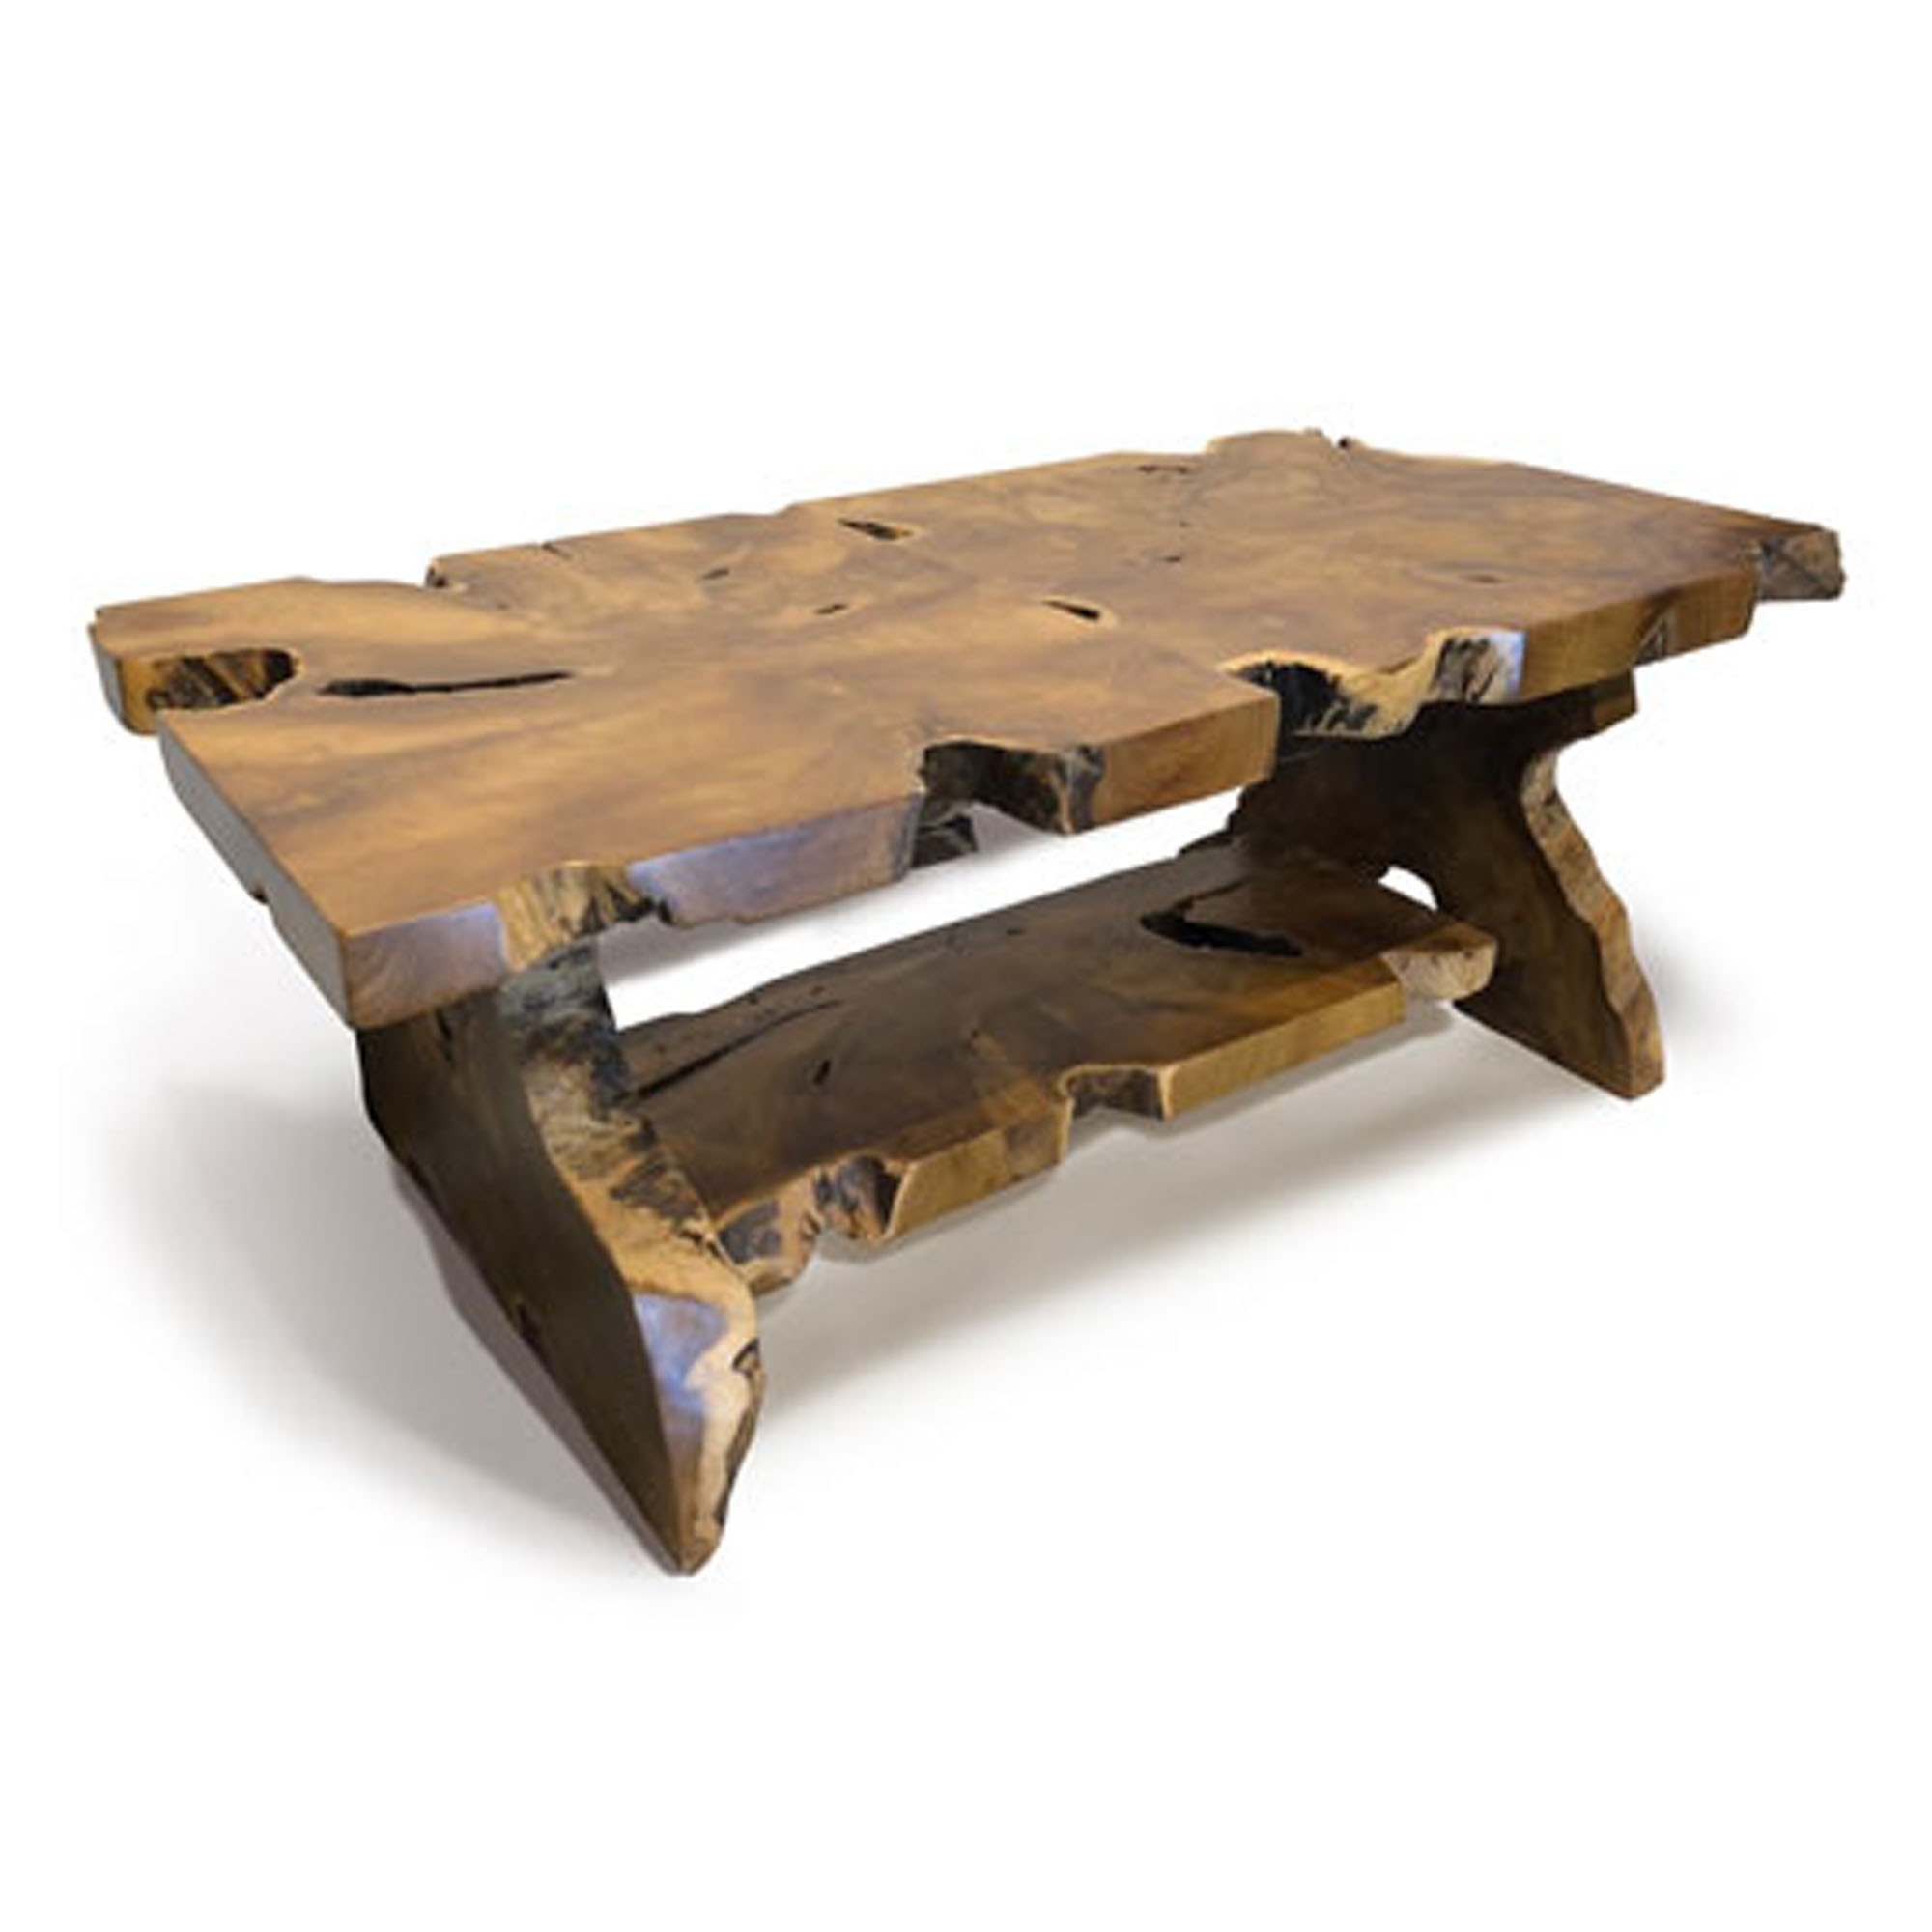 Driftwood Coffee Table Youll Love In 2021 Visualhunt